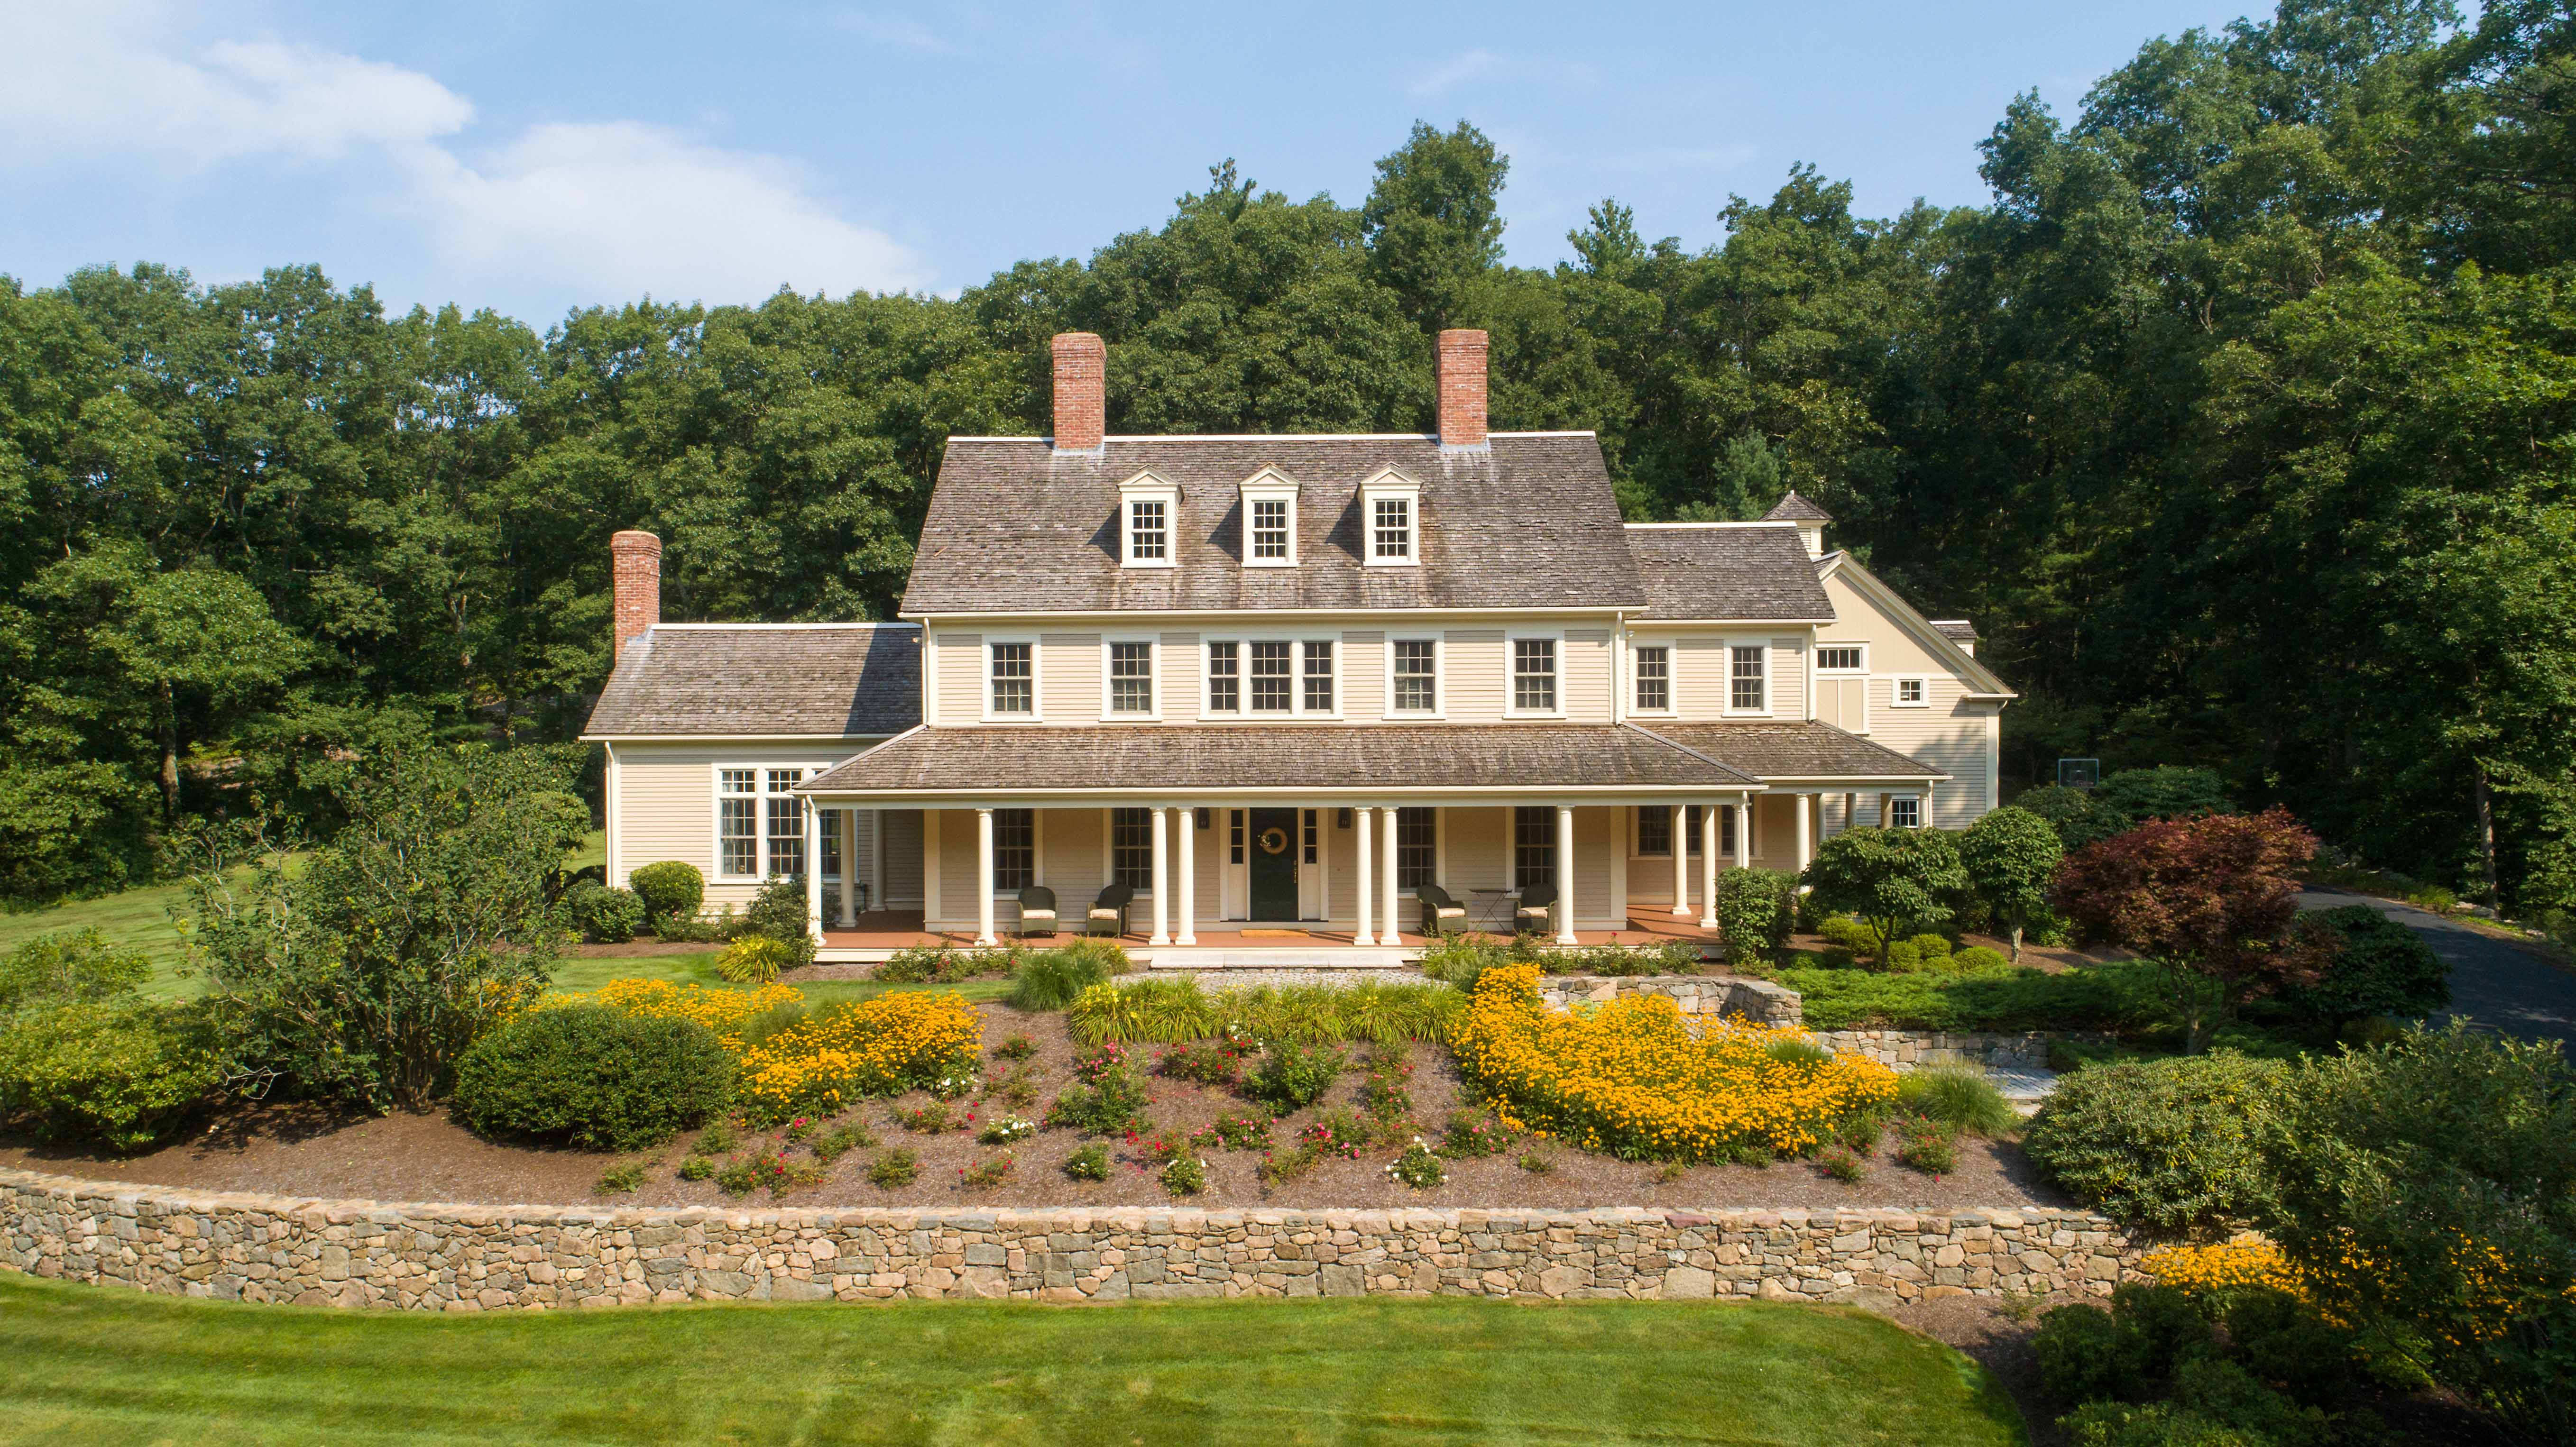 STATELY WRENTHAM COLONIAL SELLS FOR $1.1M, MARKING 2ND HIGHEST SALE IN TOWN SINCE DECEMBER 2015*